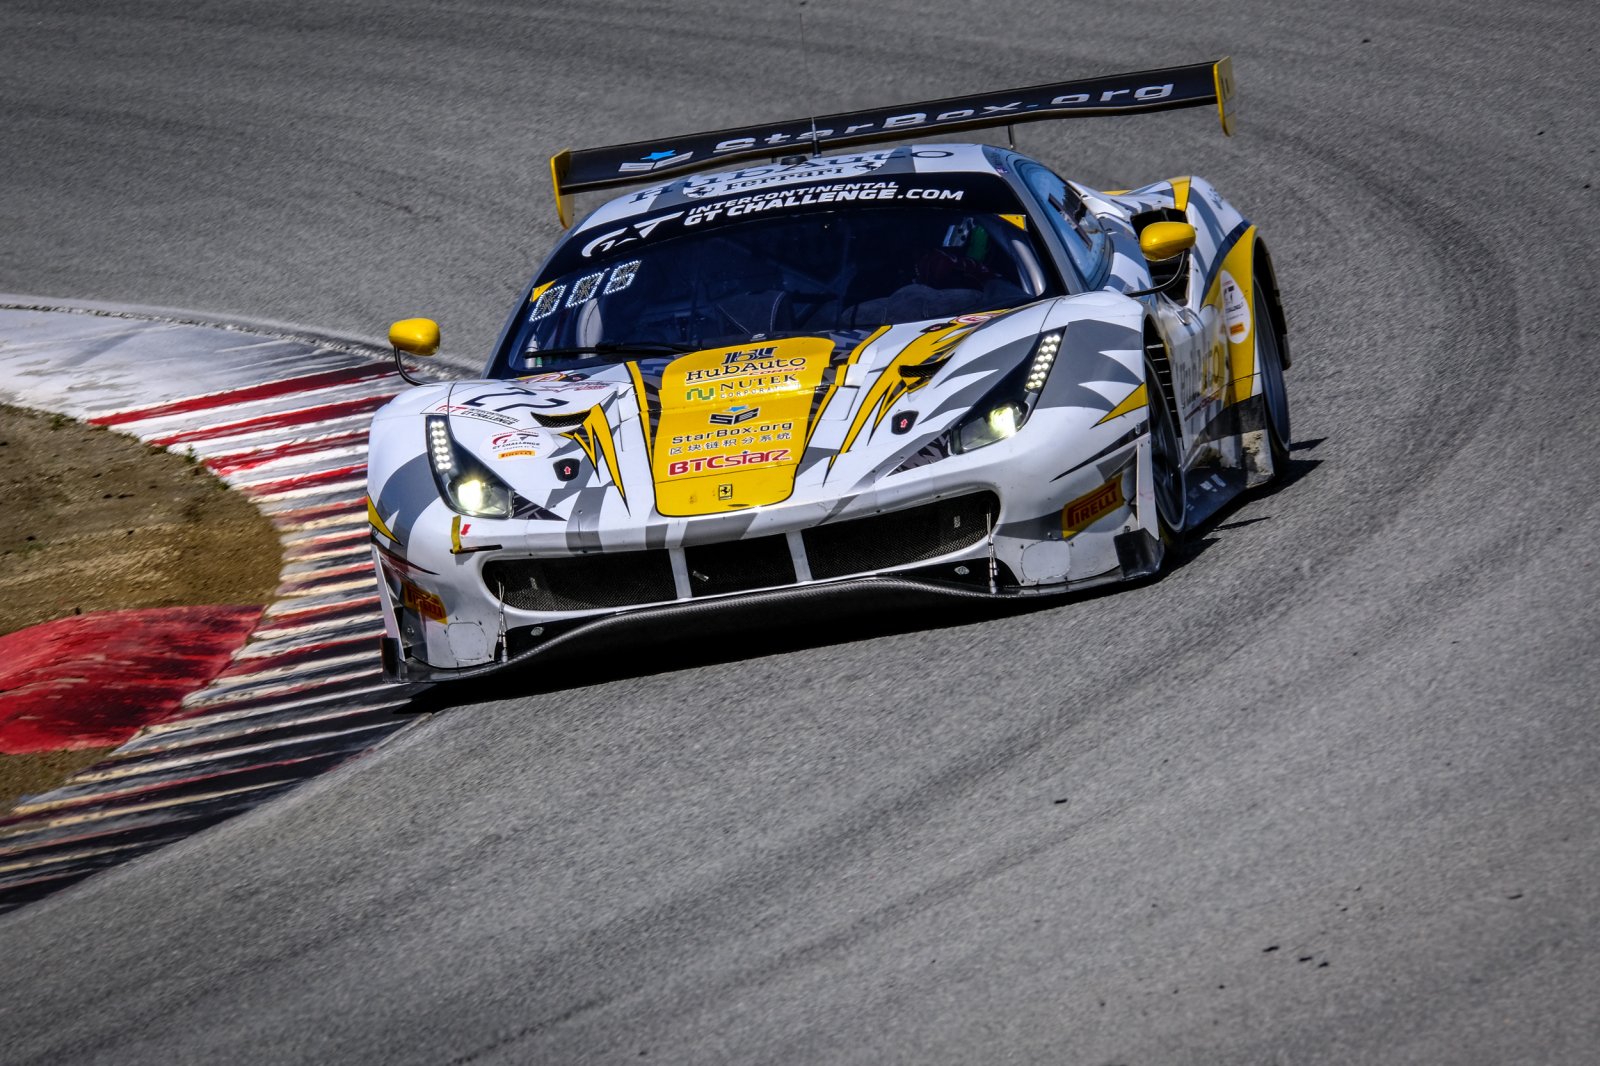 Cassidy and Serra join Foster for Ferrari HubAuto’s Total 24 Hours of Spa assault